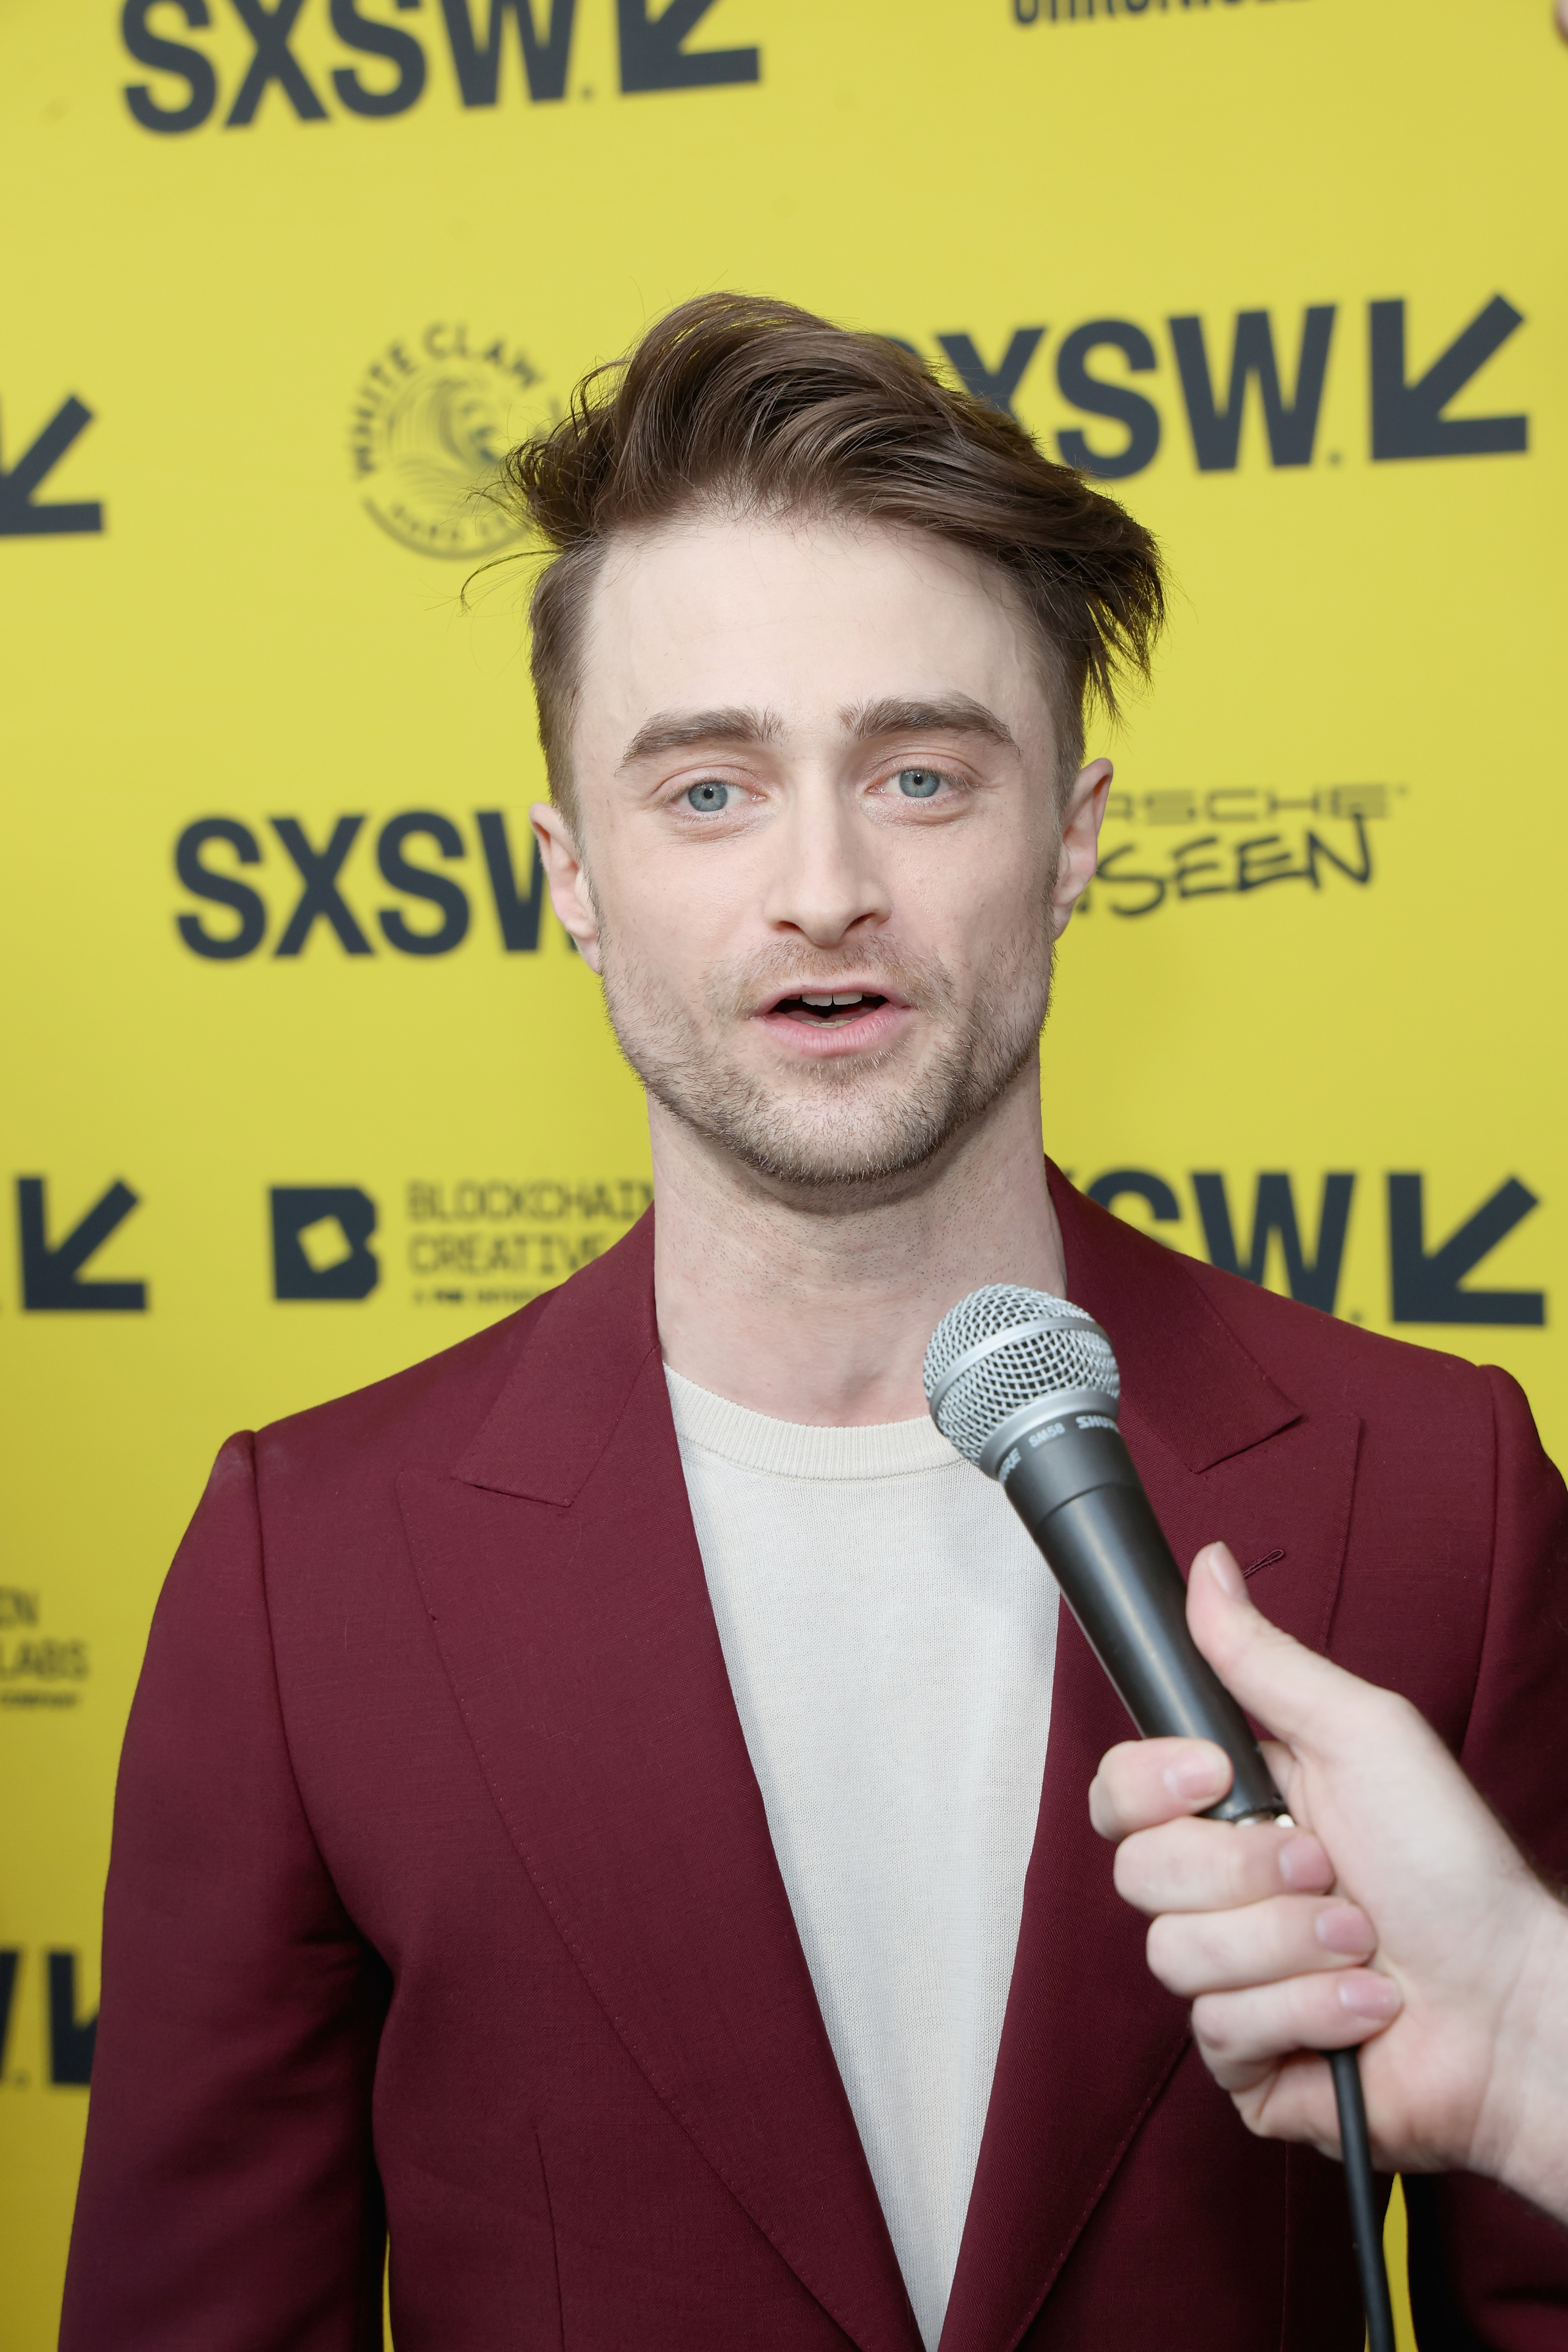 daniel giving an interview at sxsw